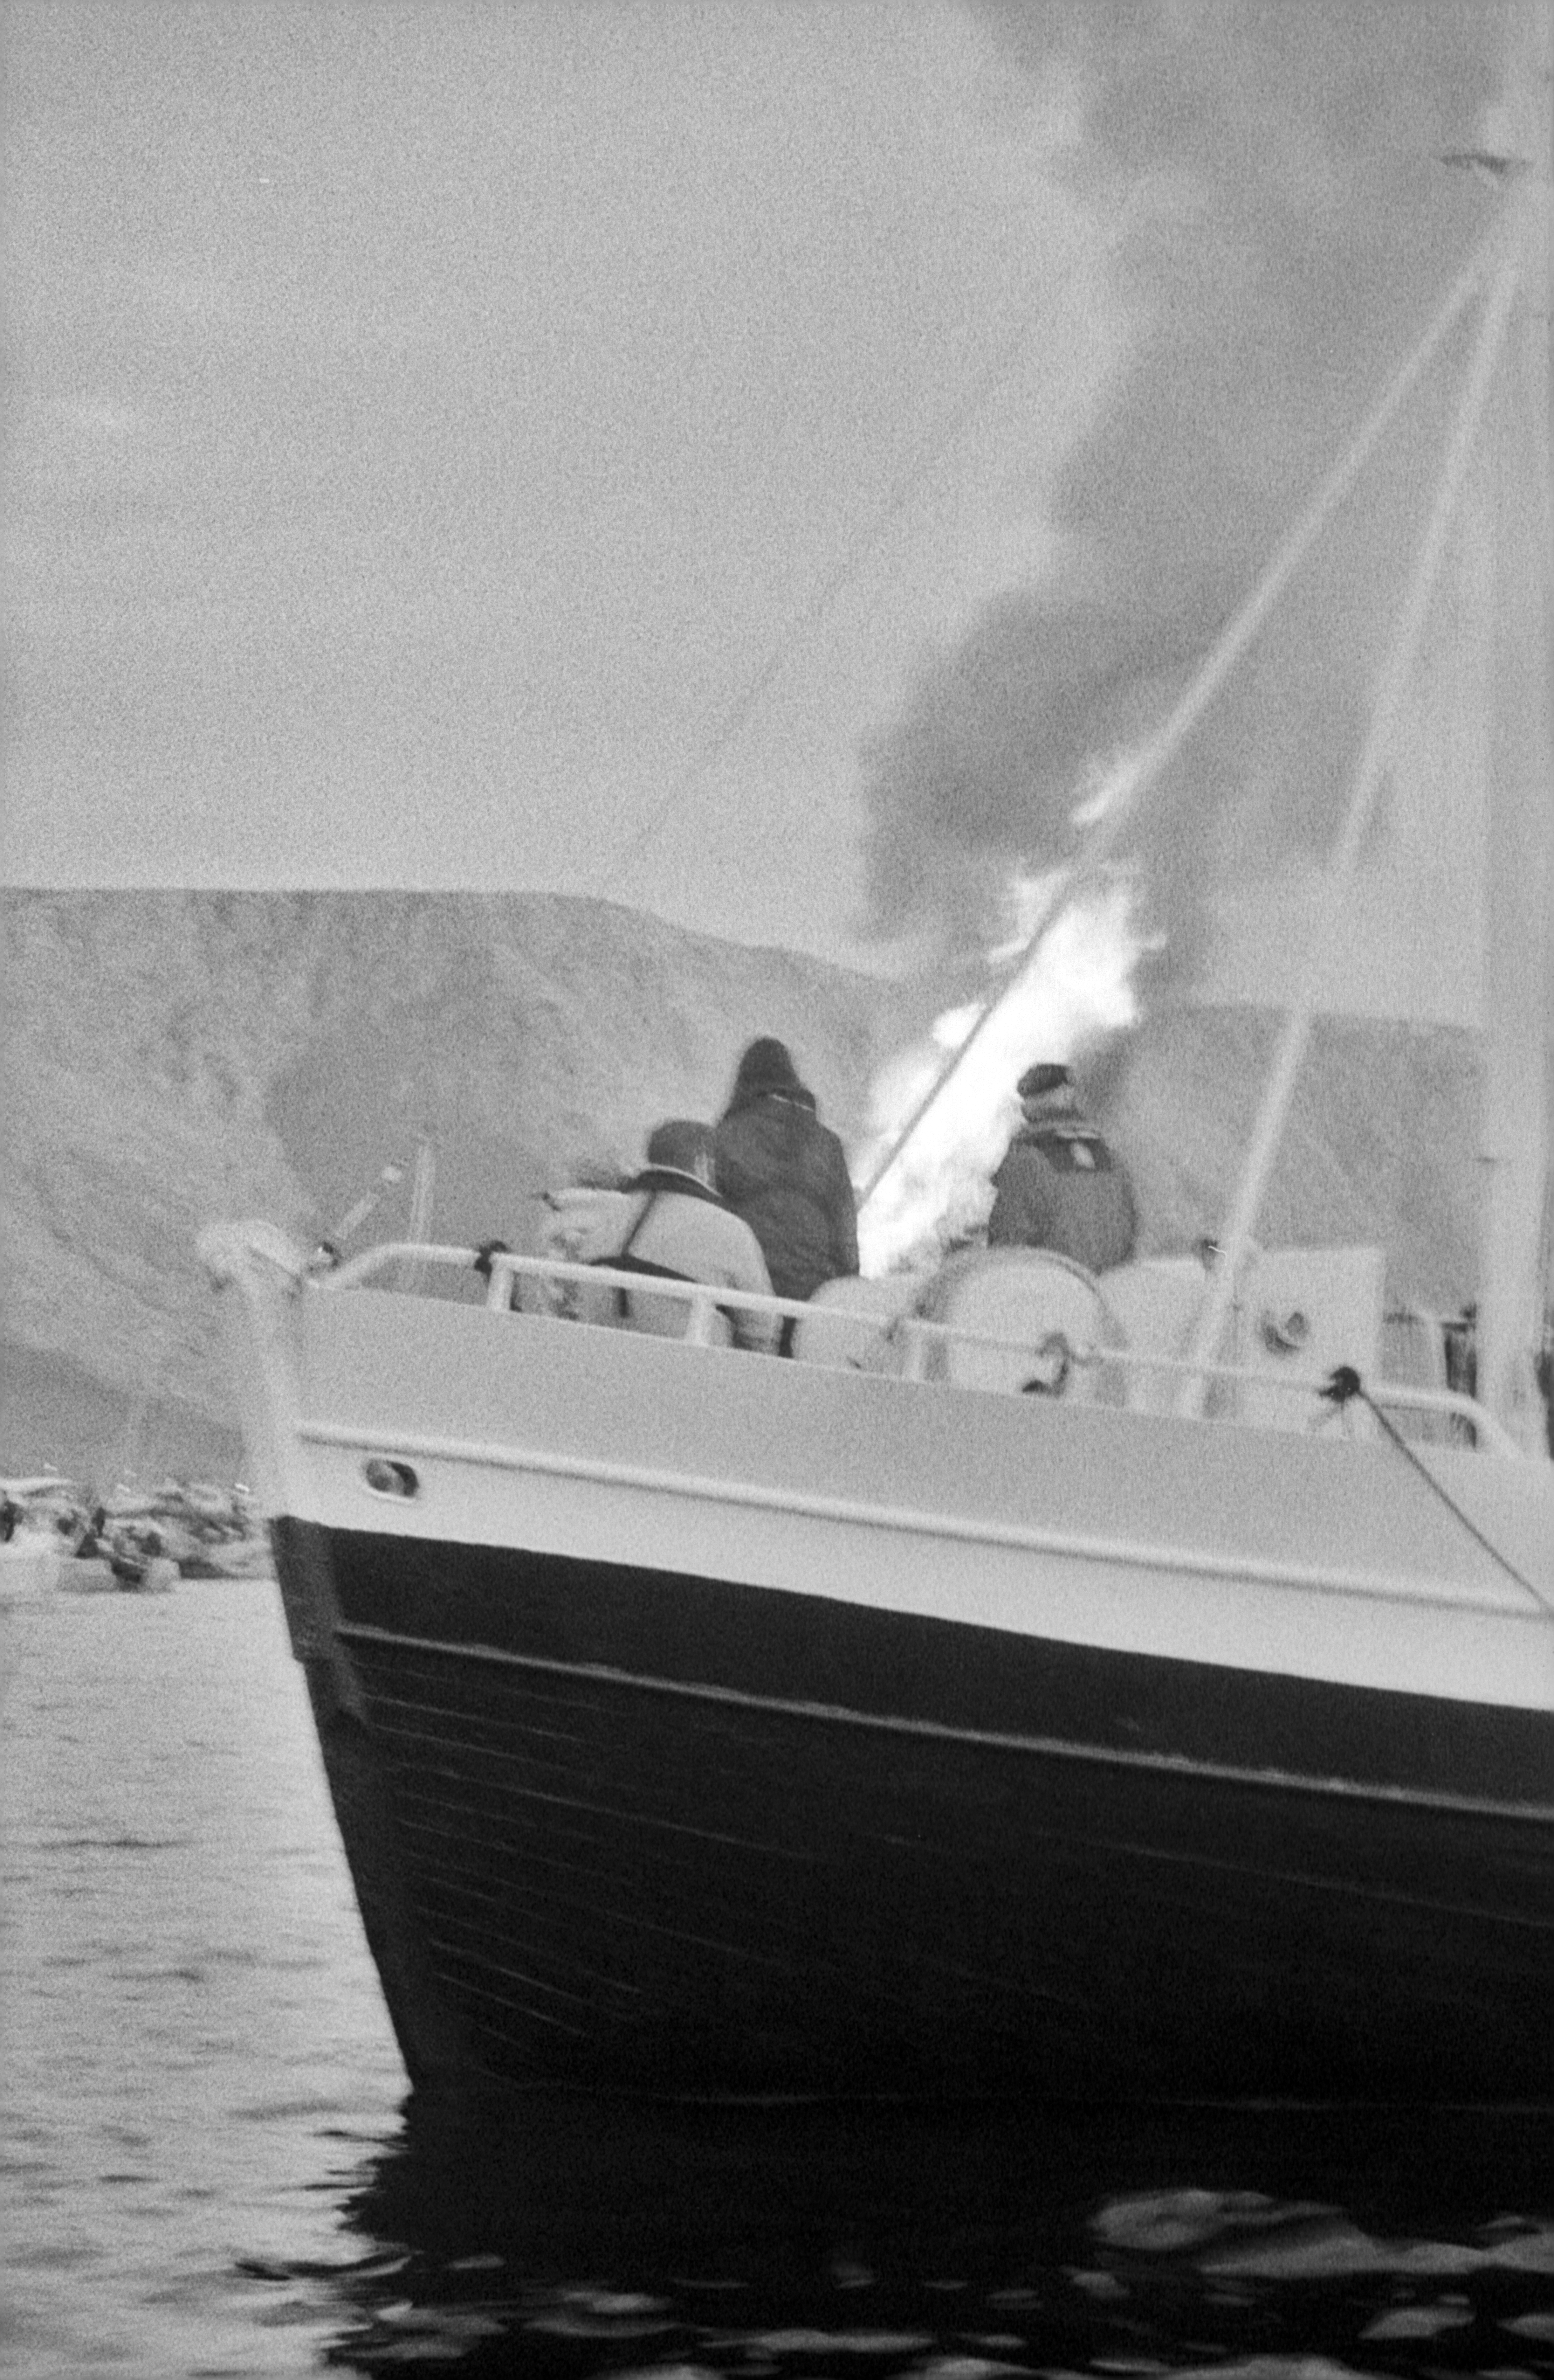 Black and white picture of Slinningsbålet and boats